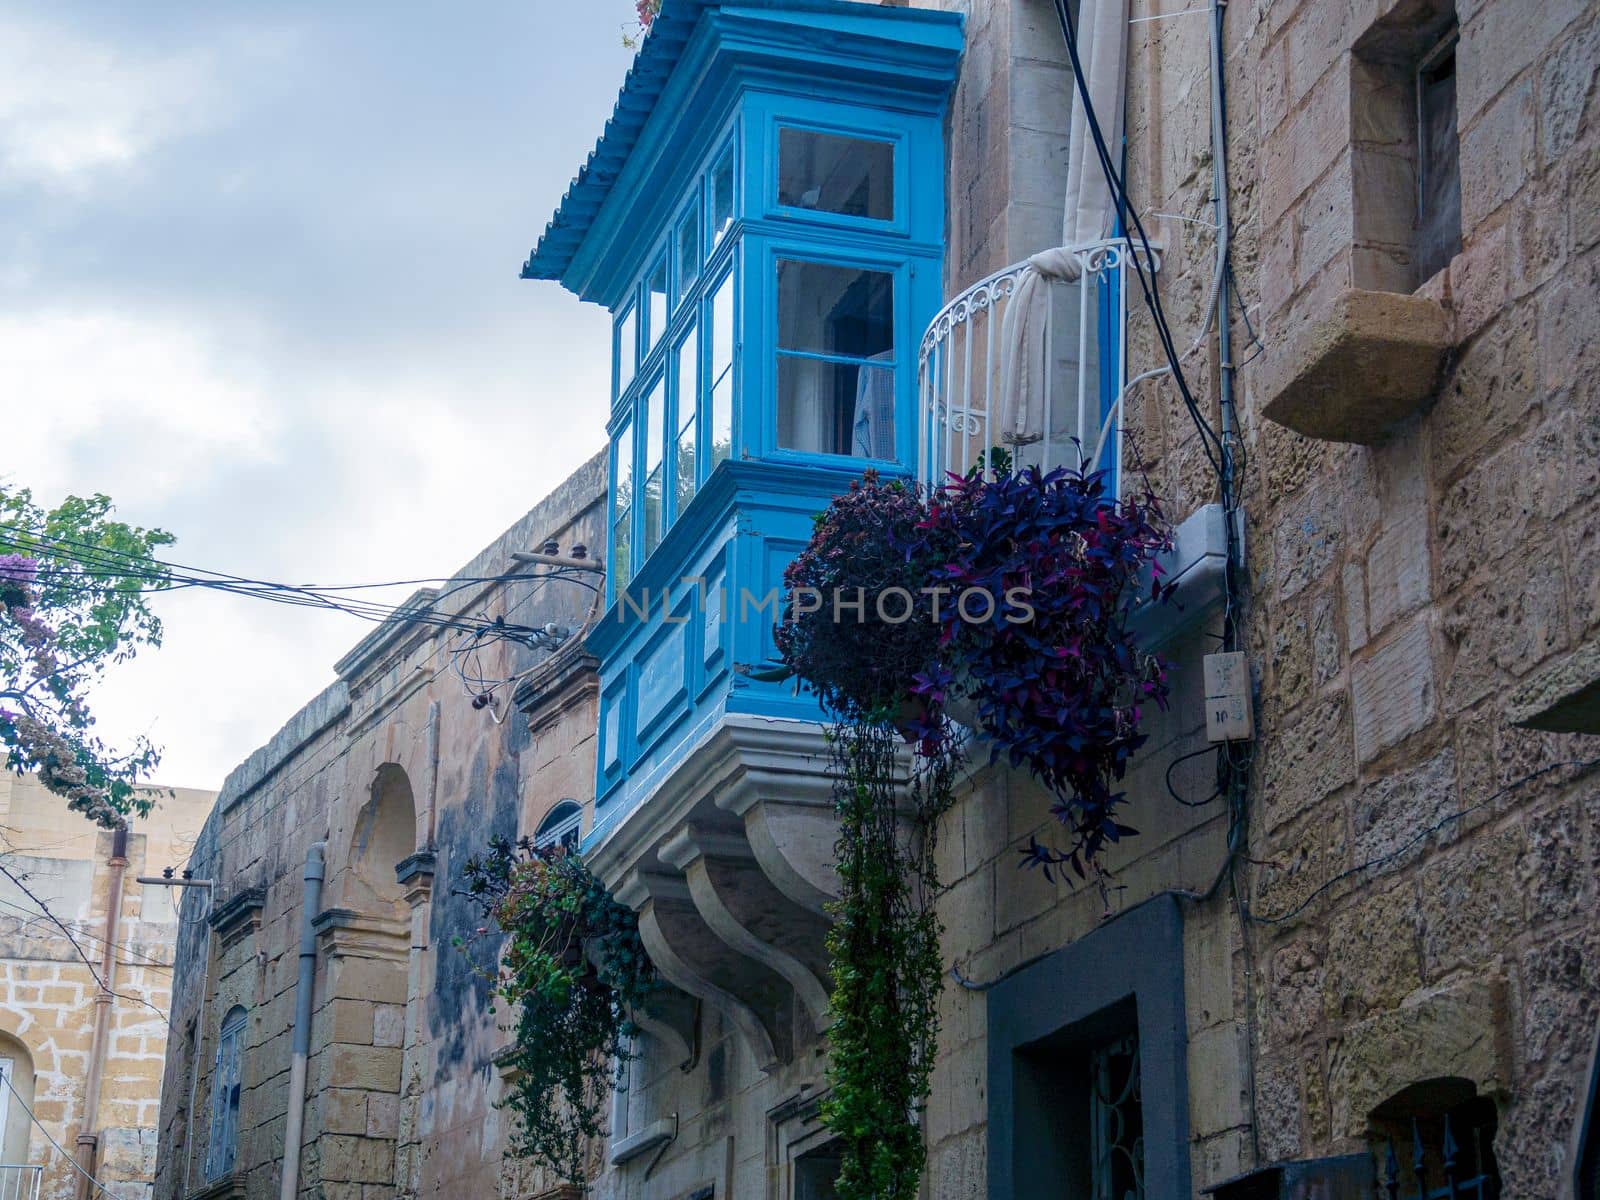 Fragment of the building's facade with traditional wooden ornate balconies painted in Valletta, Malta. High quality photo